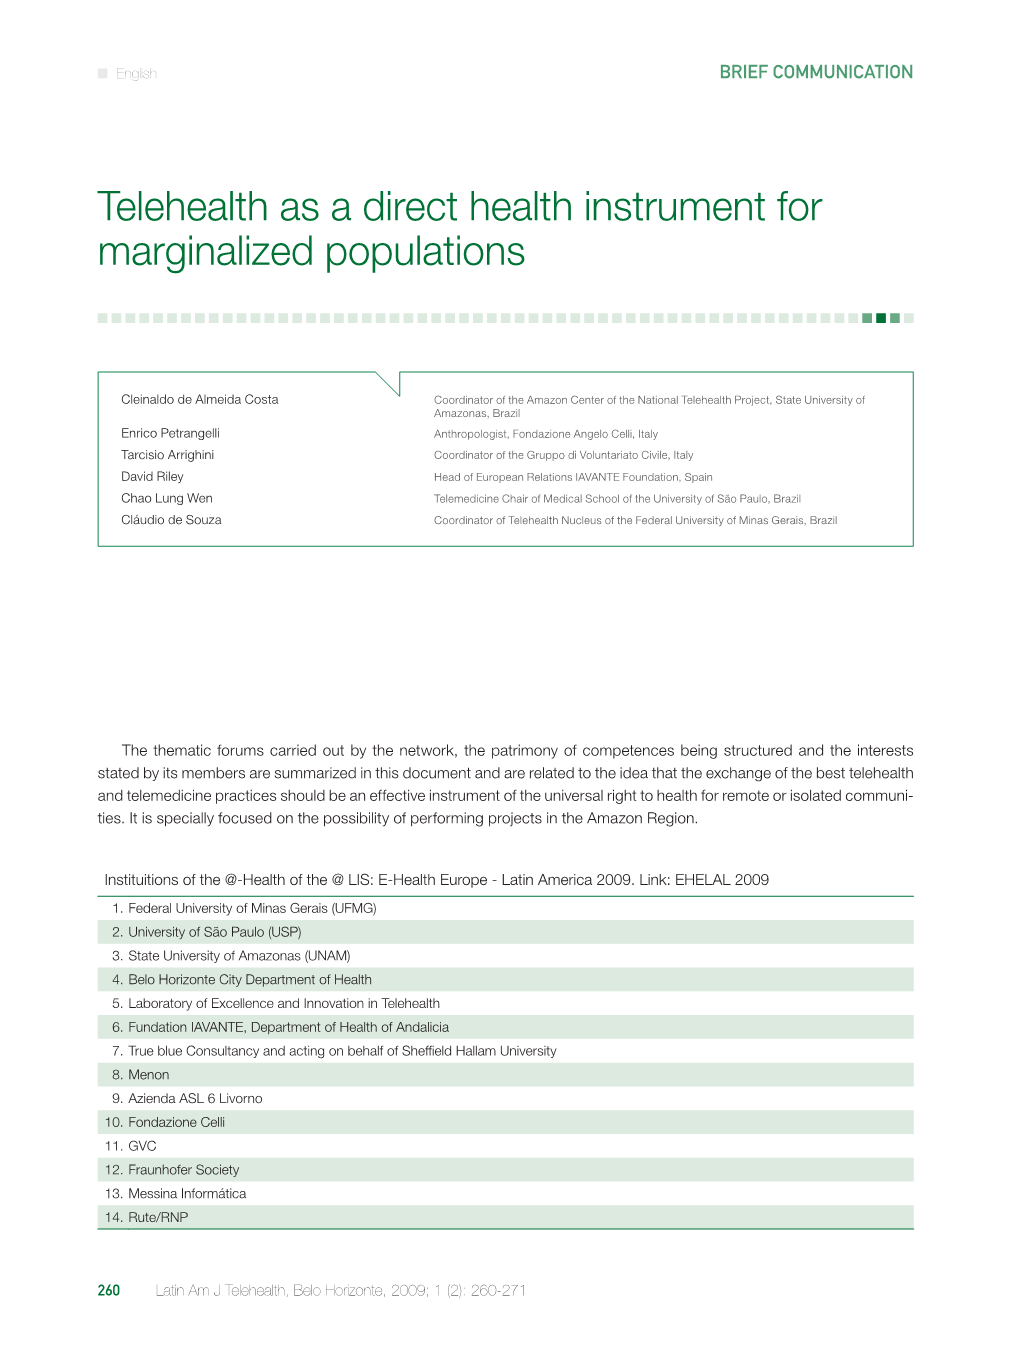 Telehealth As a Direct Health Instrument for Marginalized Populations